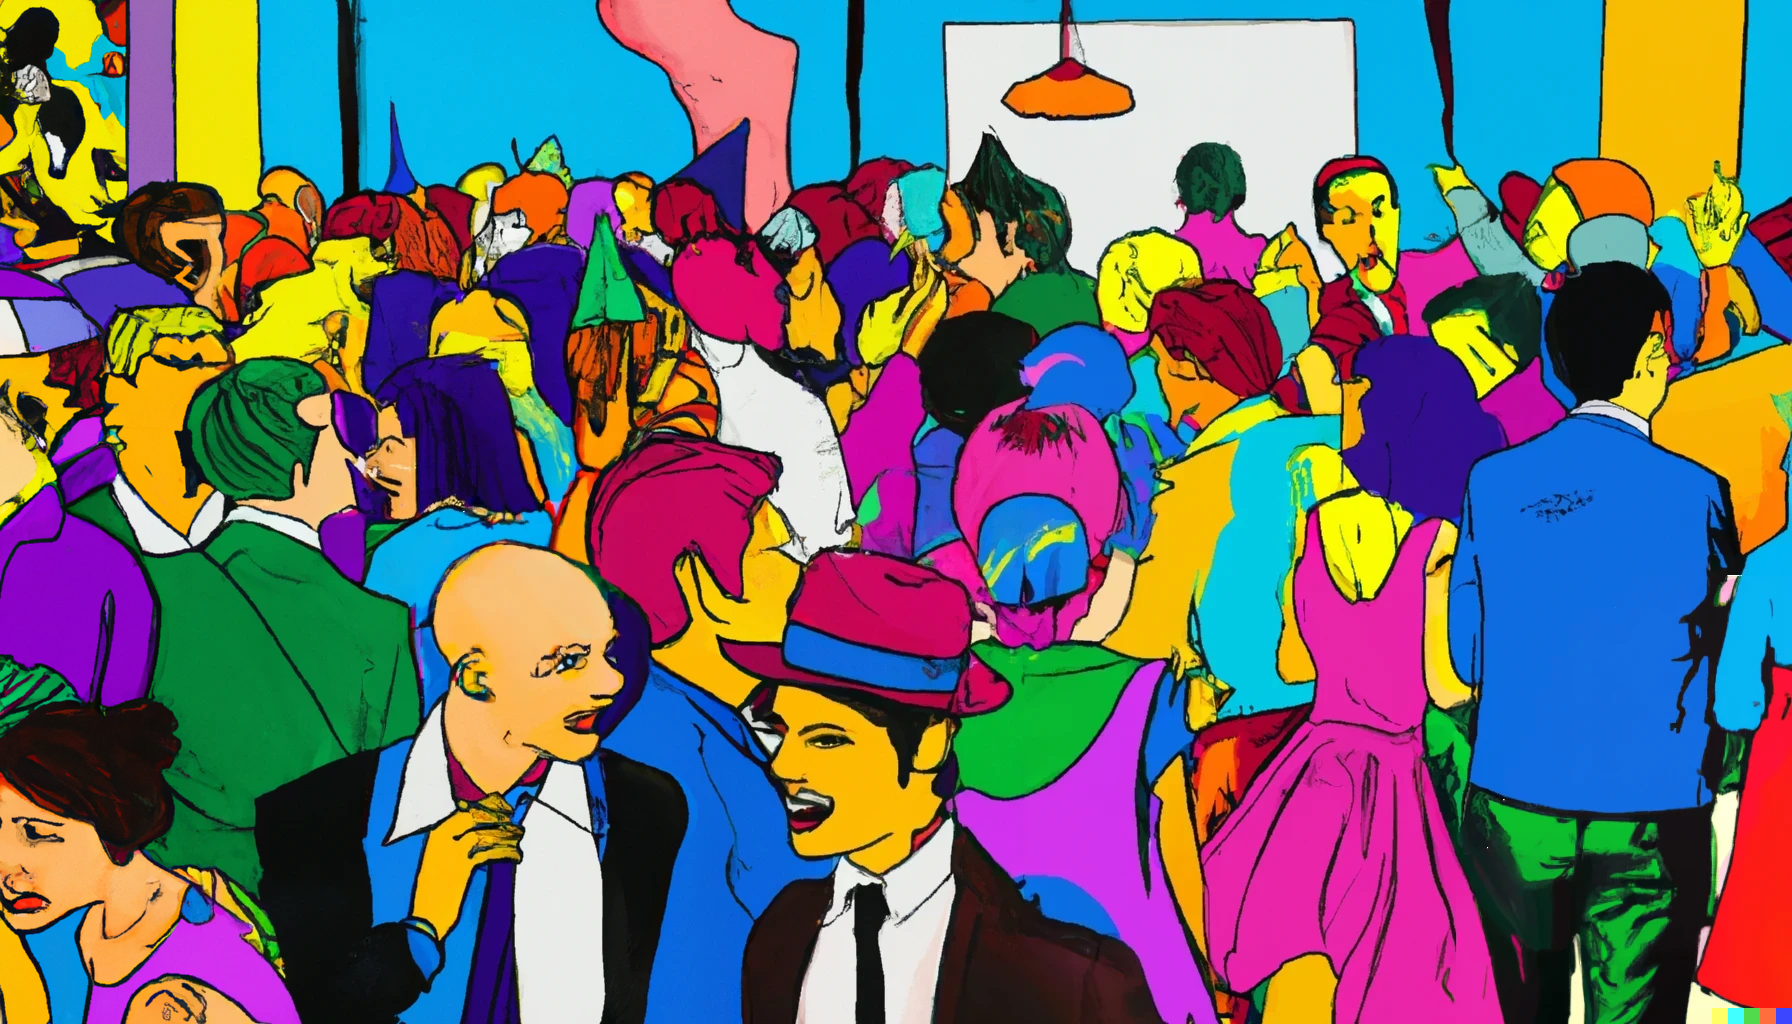 pop art painting of a crowded office party with many people